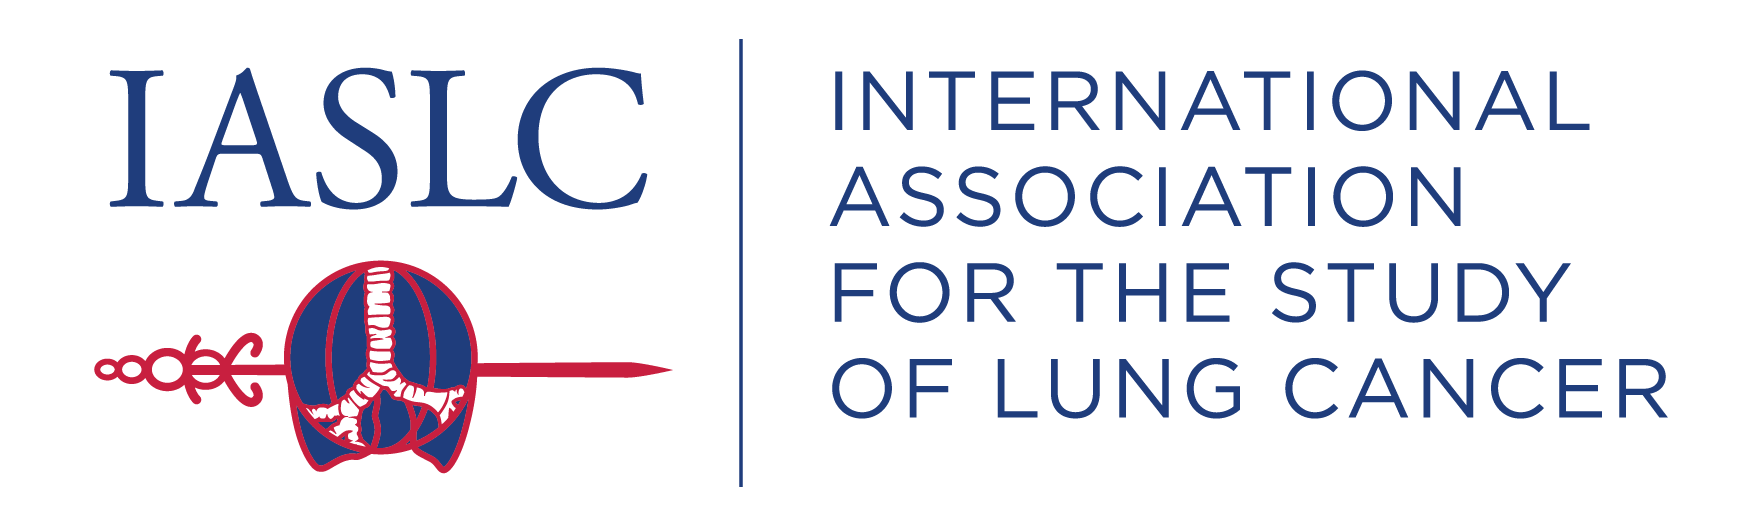 IASLC - International Association for the Study of Lung Cancer